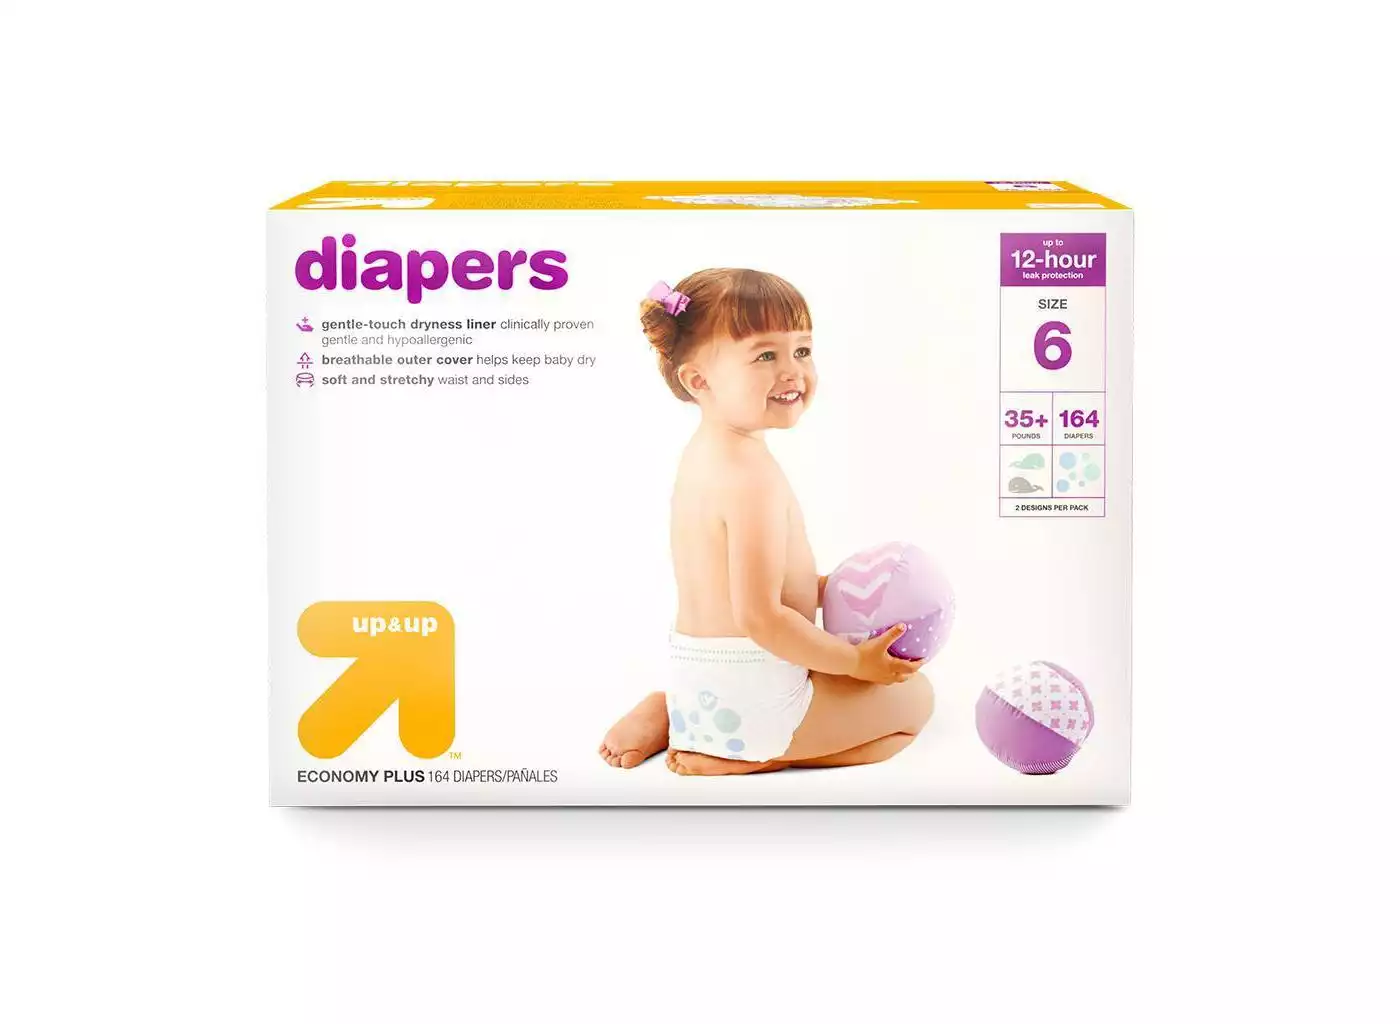 Diapers - Up & Up™ - Target Brand Diaper